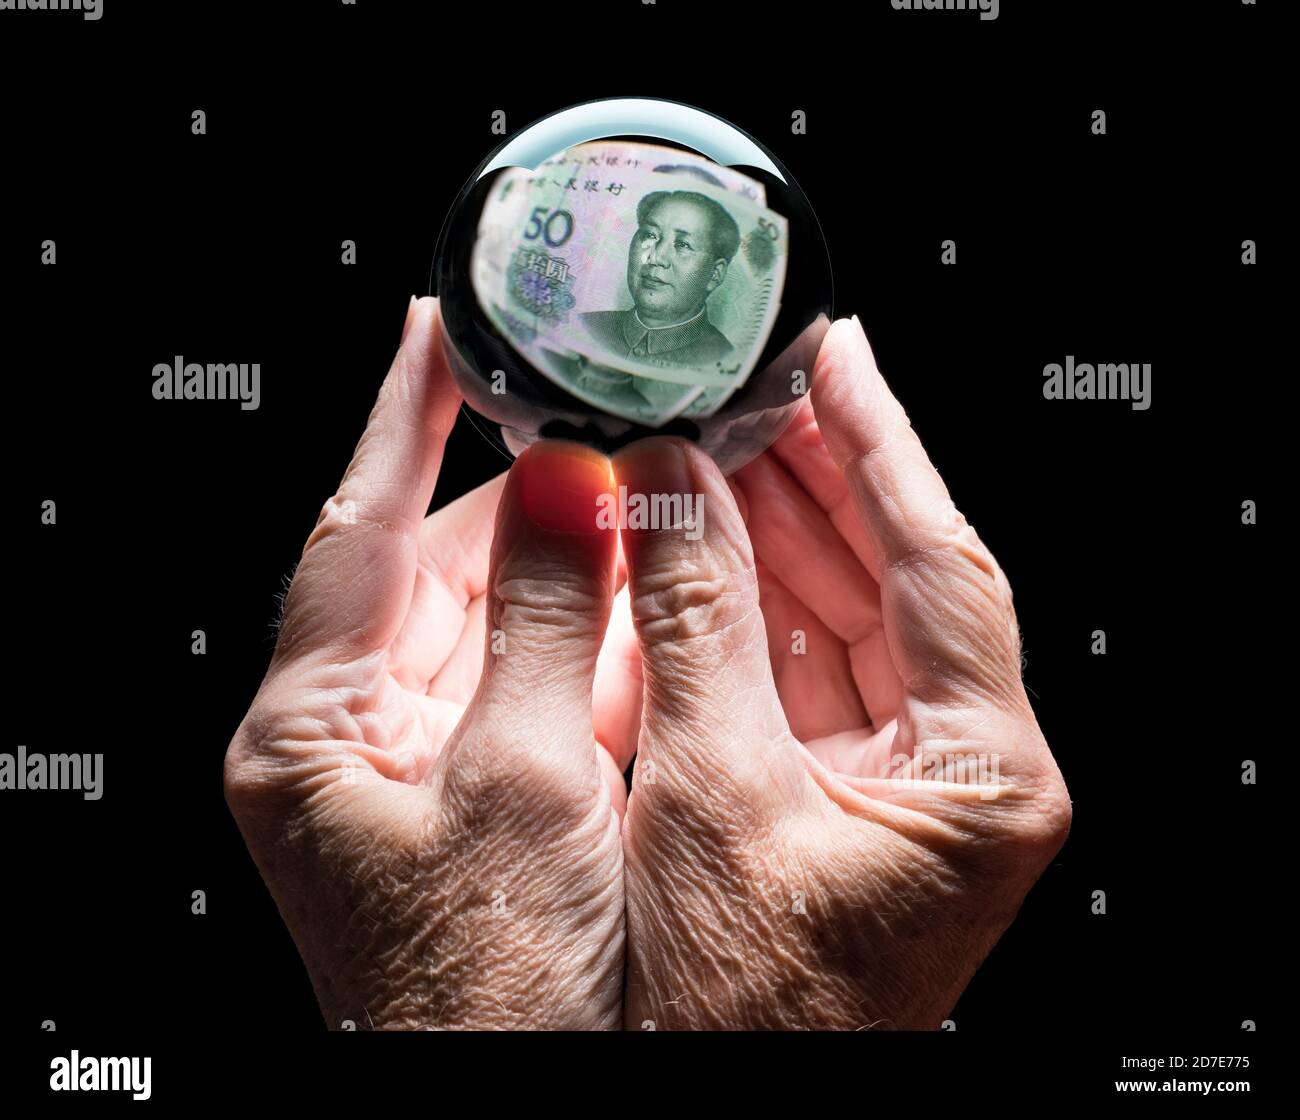 Senior caucasian hands holding a crystal futures or fortune ball reflecting a China 50 Yuan note as concept for the exchange rate for the currency Stock Photo